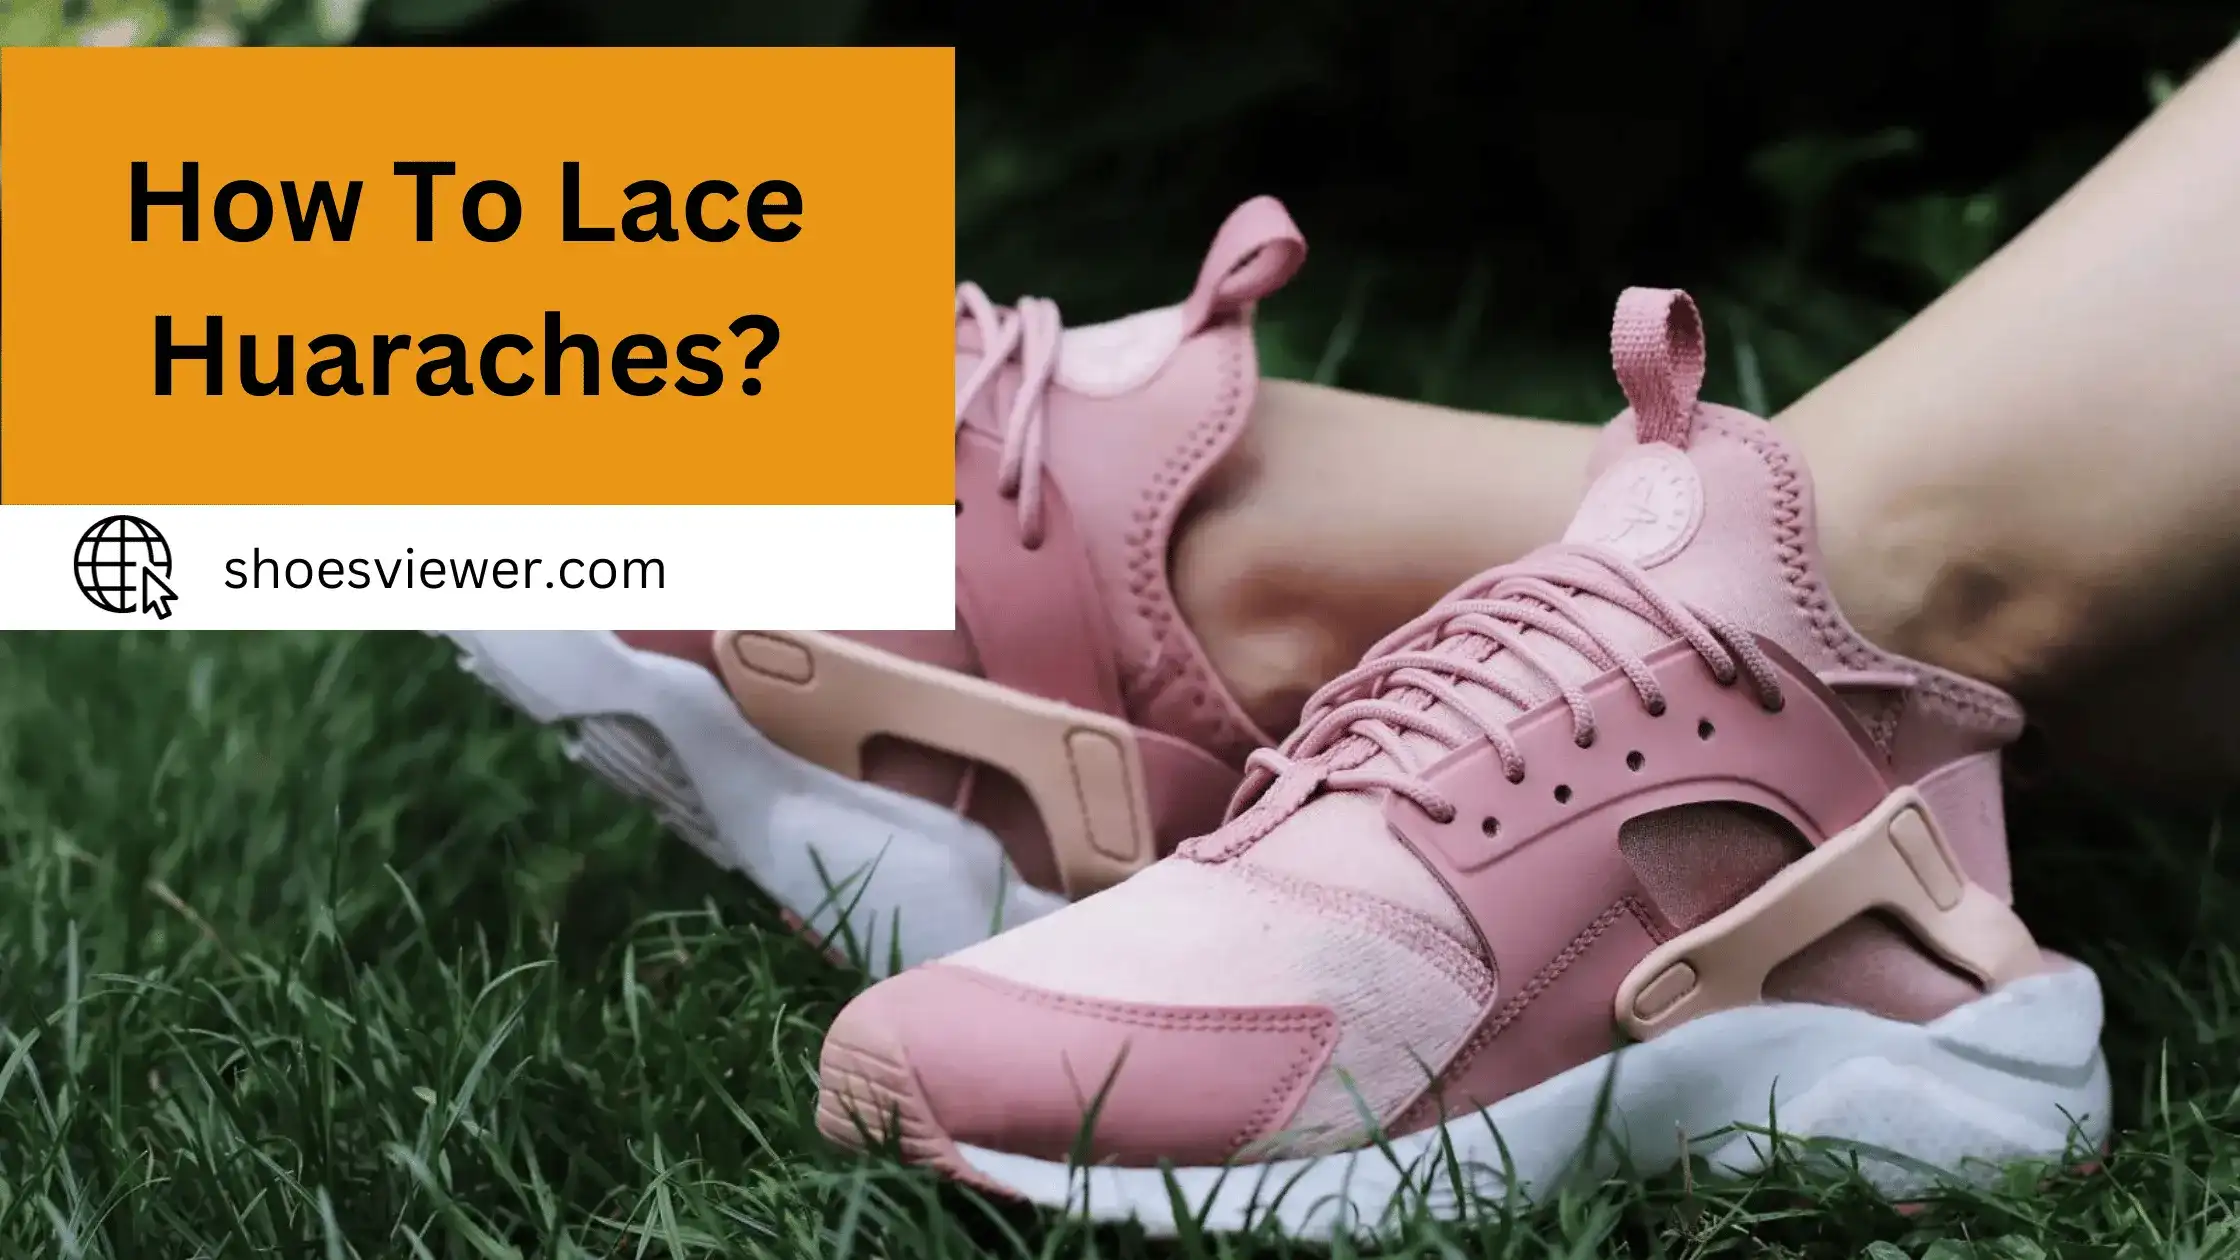 How to Lace Huaraches? Easy Guide For Everyone